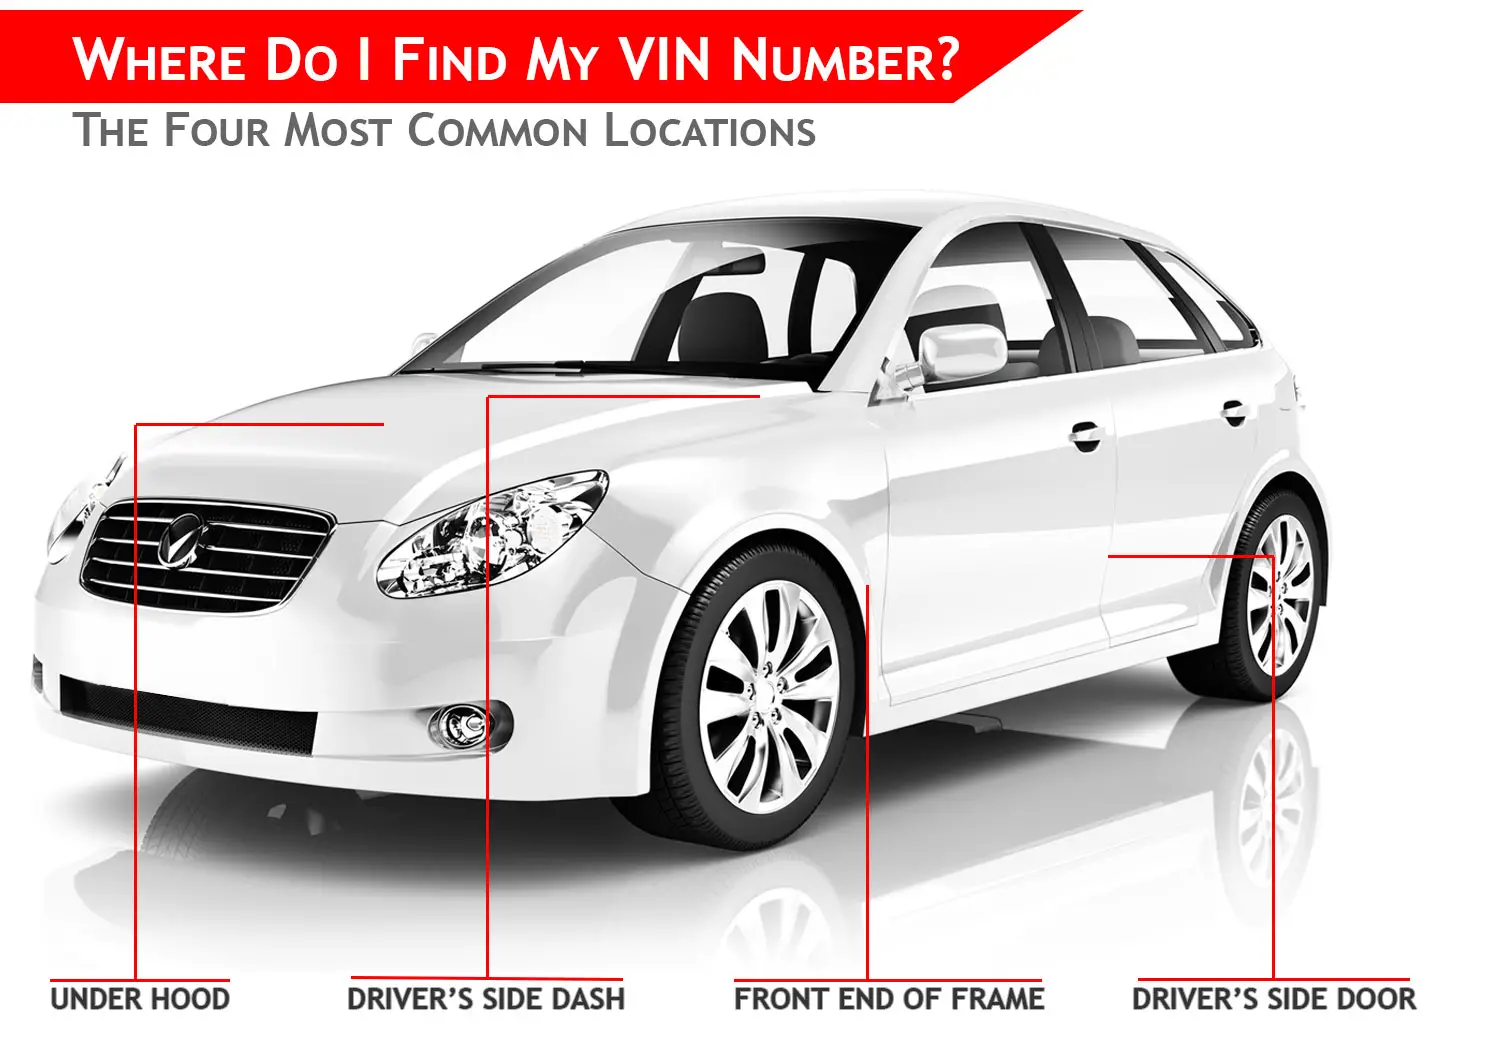 What Is A VIN Number?